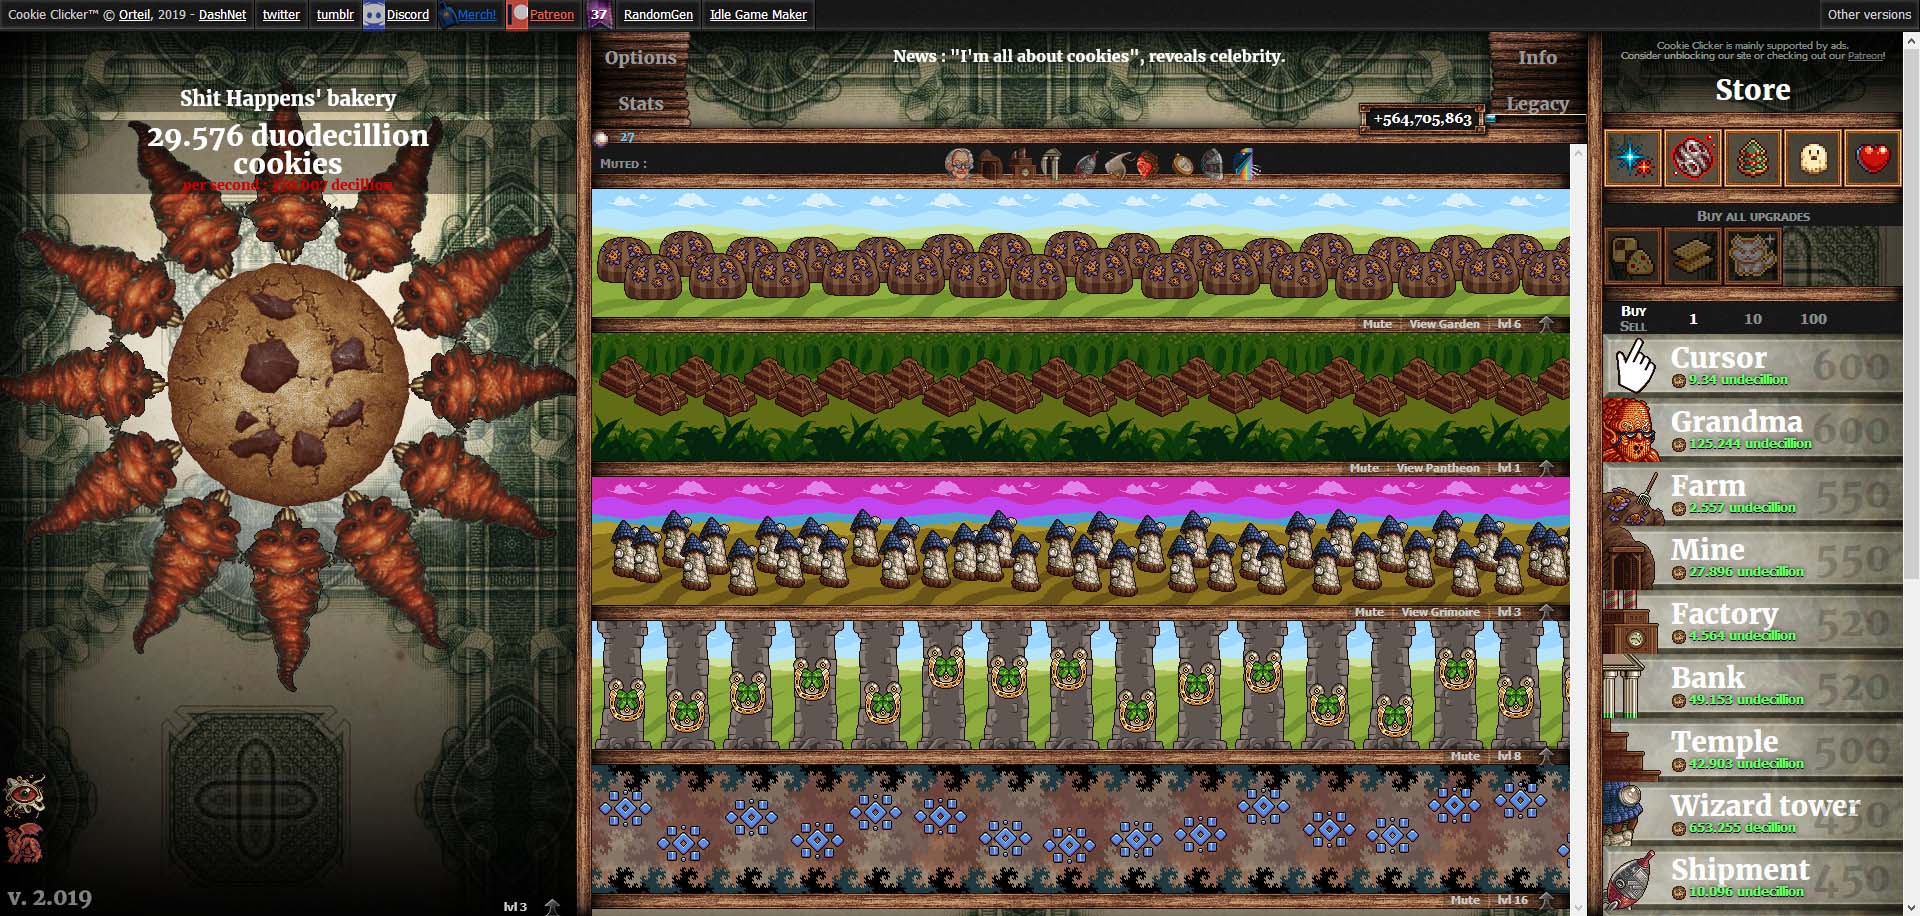 This is the most powerful hack for cookie clicker. 